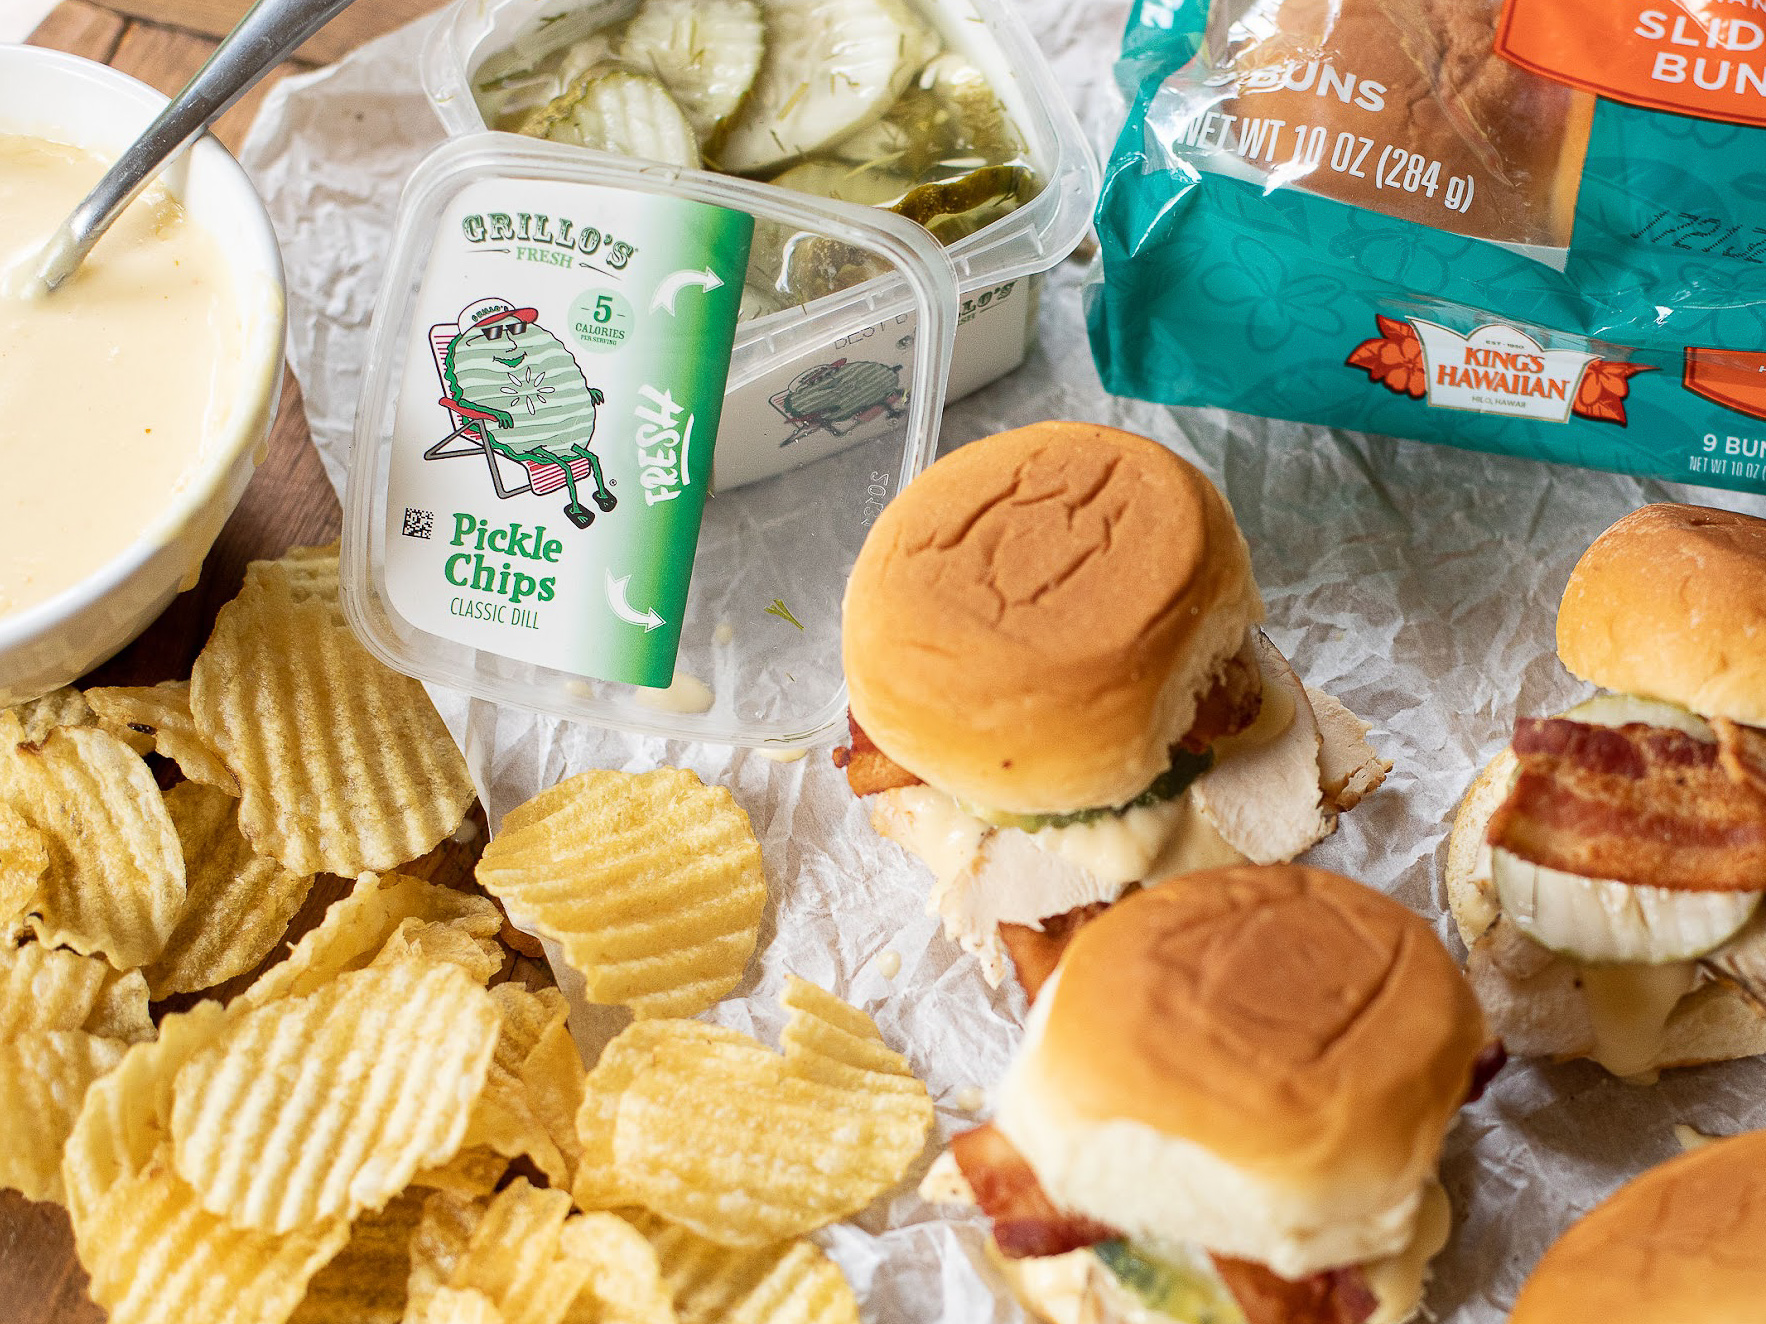 Add These Beer Cheese & Bacon Topped Chicken Sliders To Your Labor Day Menu on I Heart Publix 1